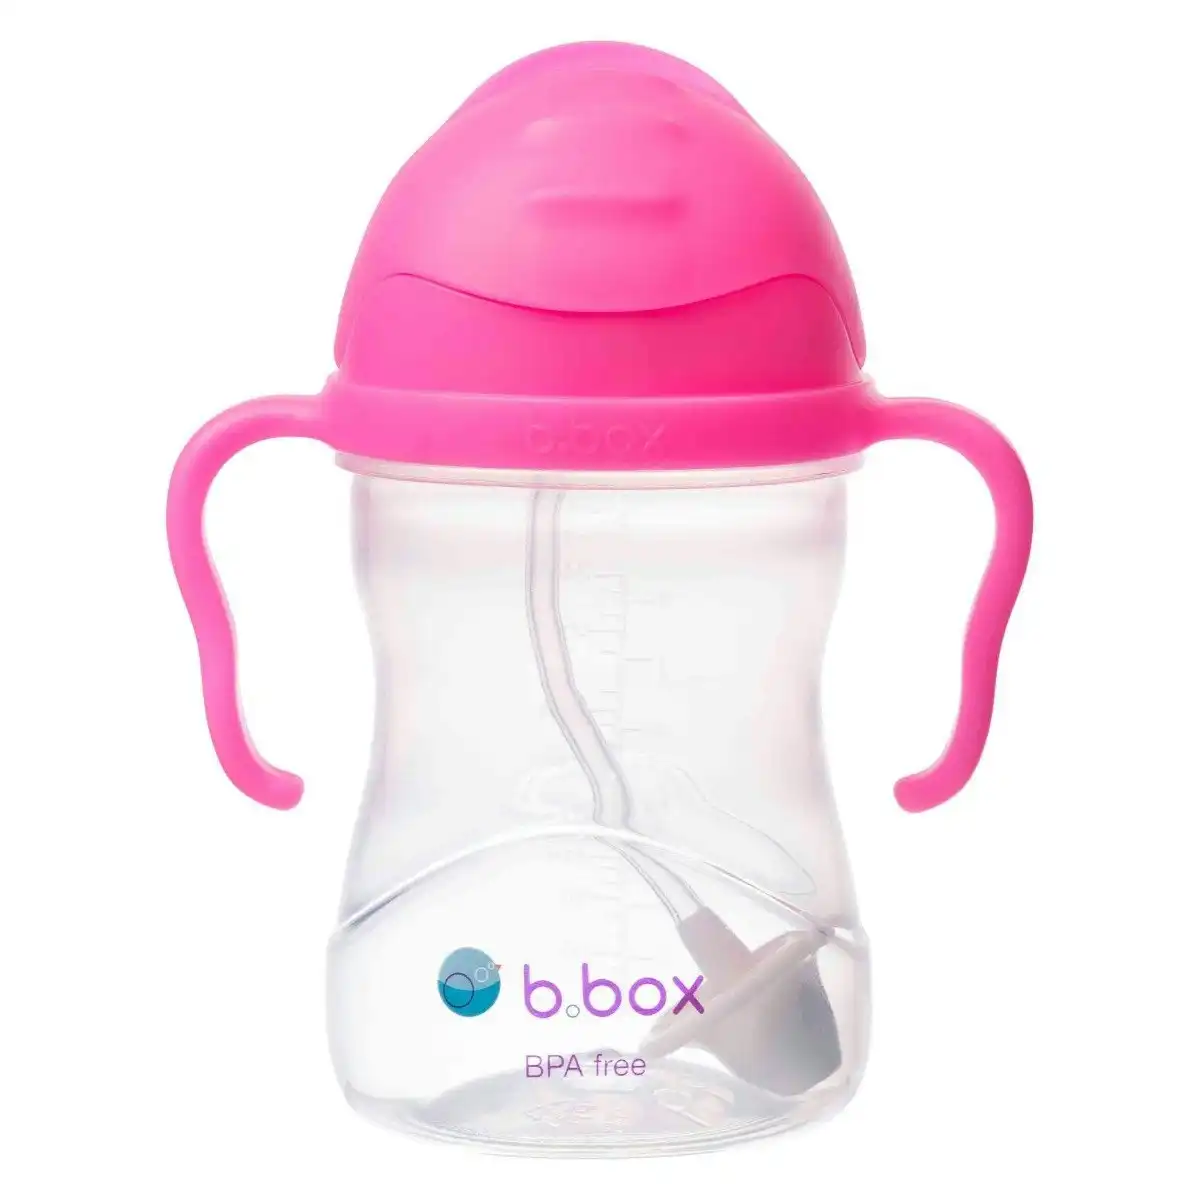 b.box Sippy Cup - Pink Pomegrante - Limited Edition